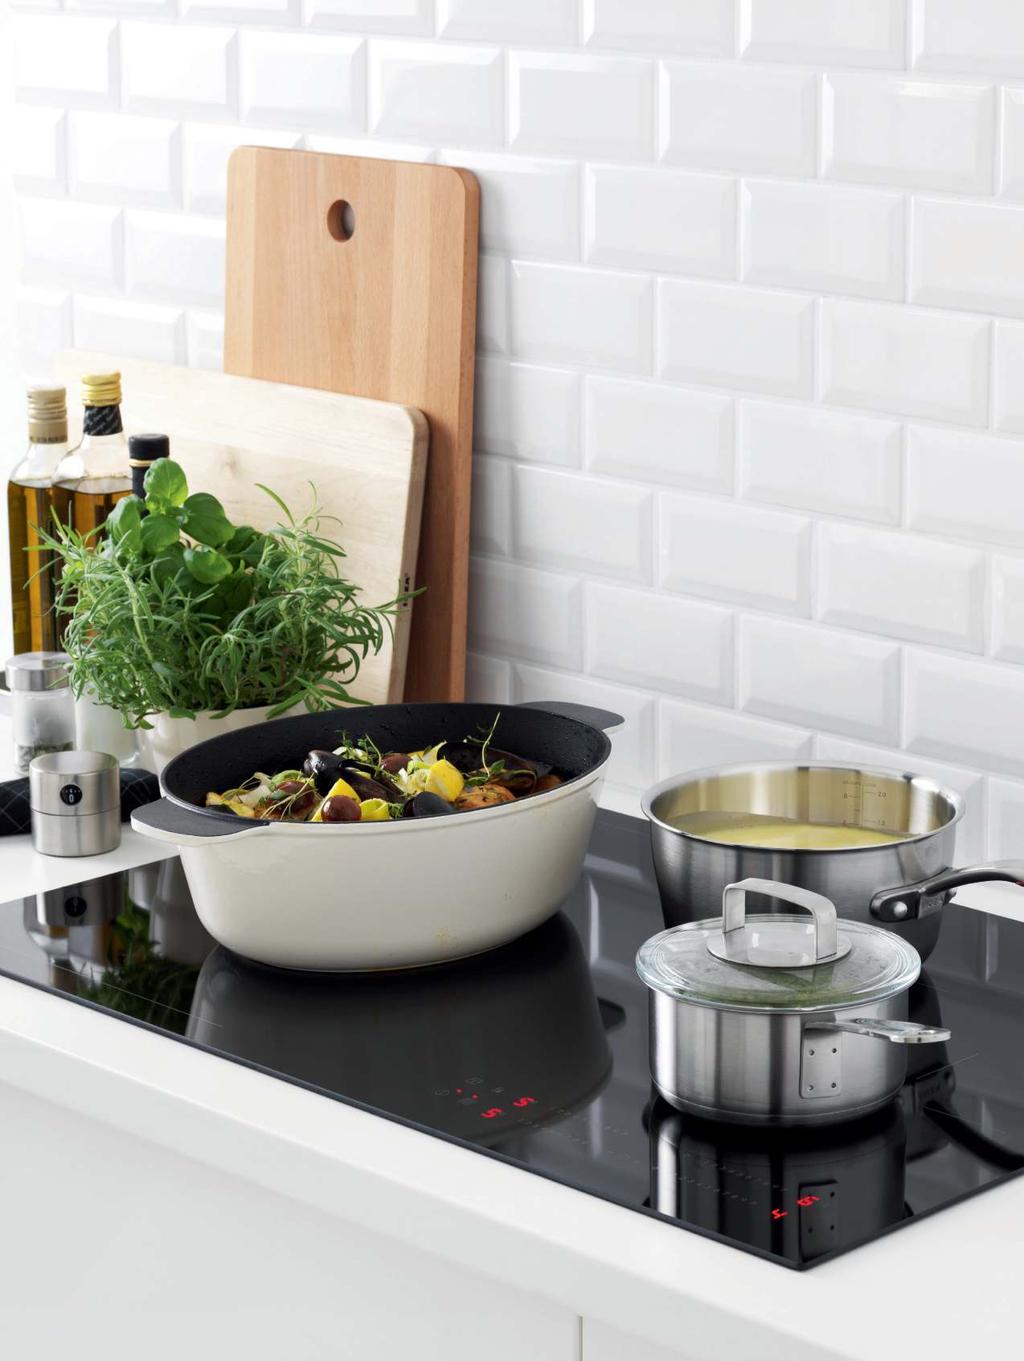 HOBS To make everyday cooking more of a joy, we have a variety of hobs ready to warm every cook's heart.